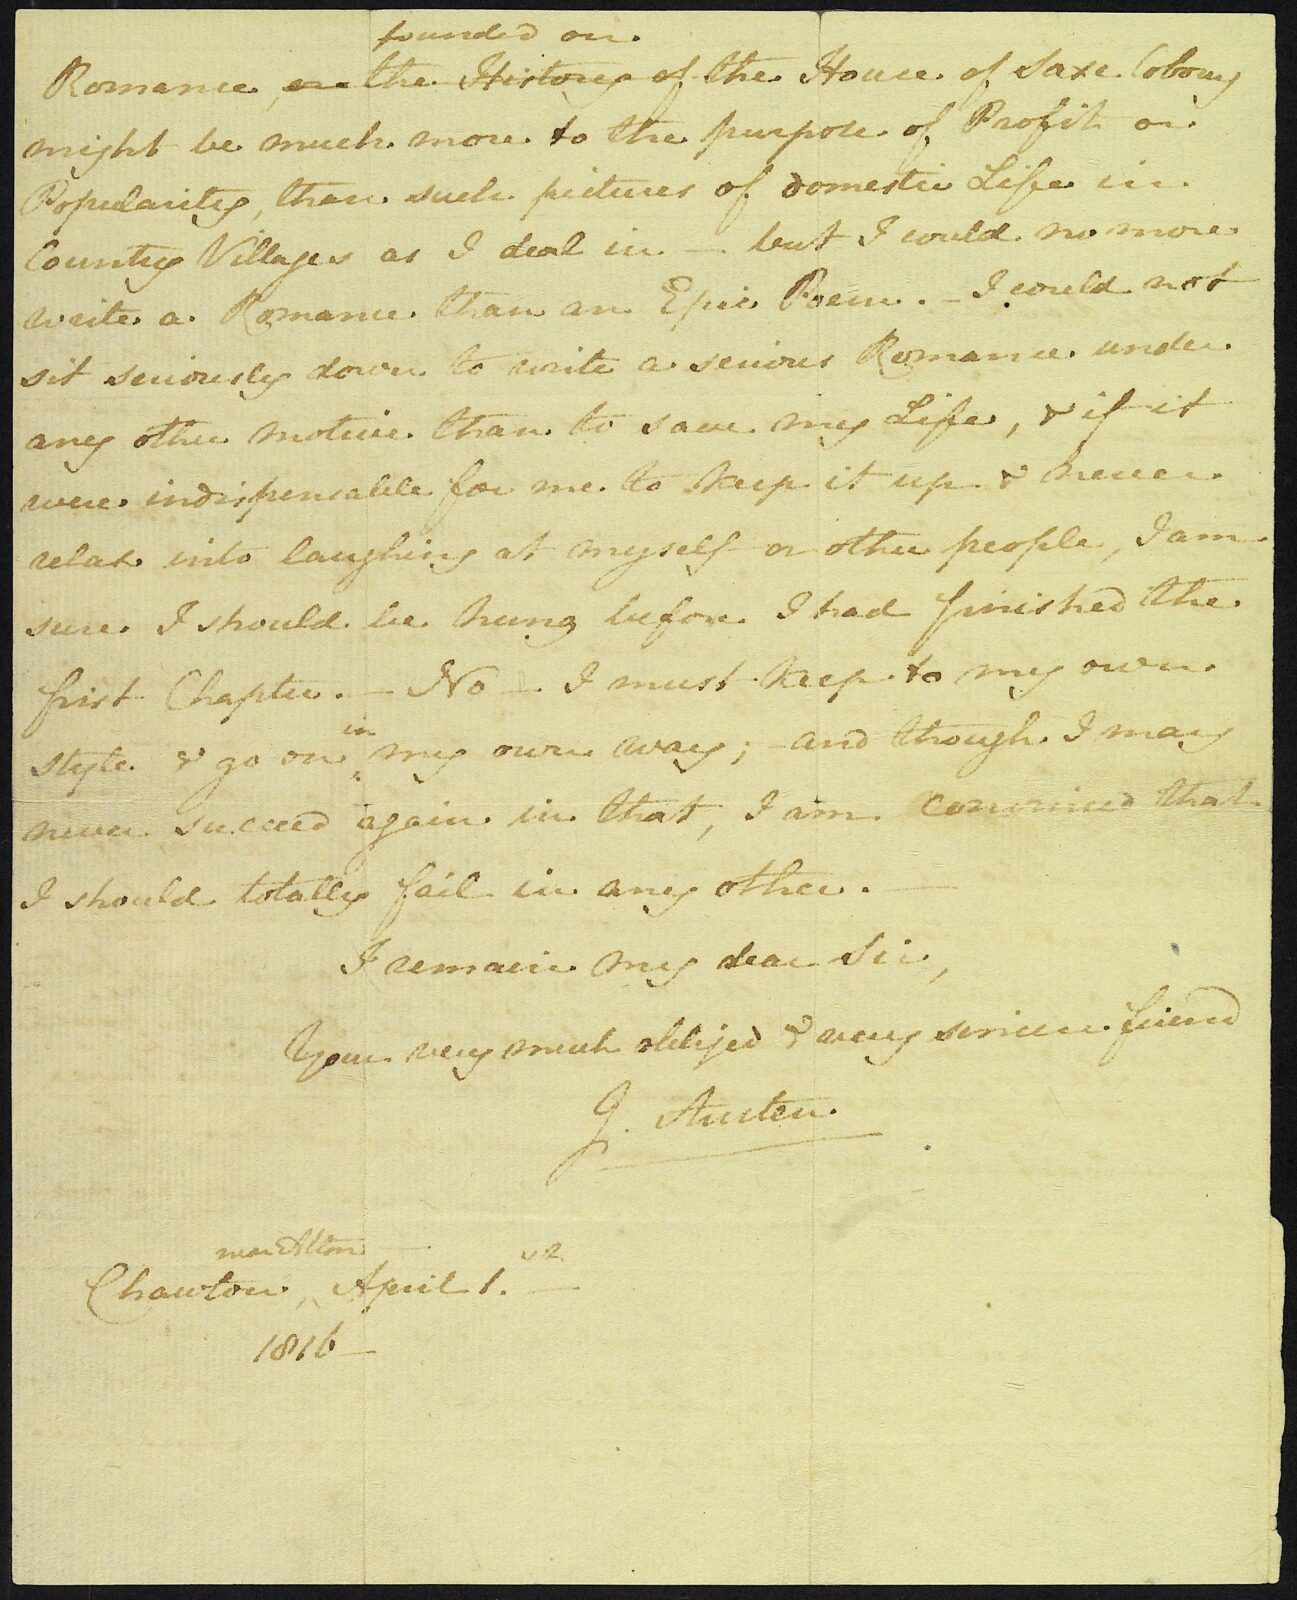 The second page of a letter from Jane Austen to James Stanier Clarke, 1 April 1816